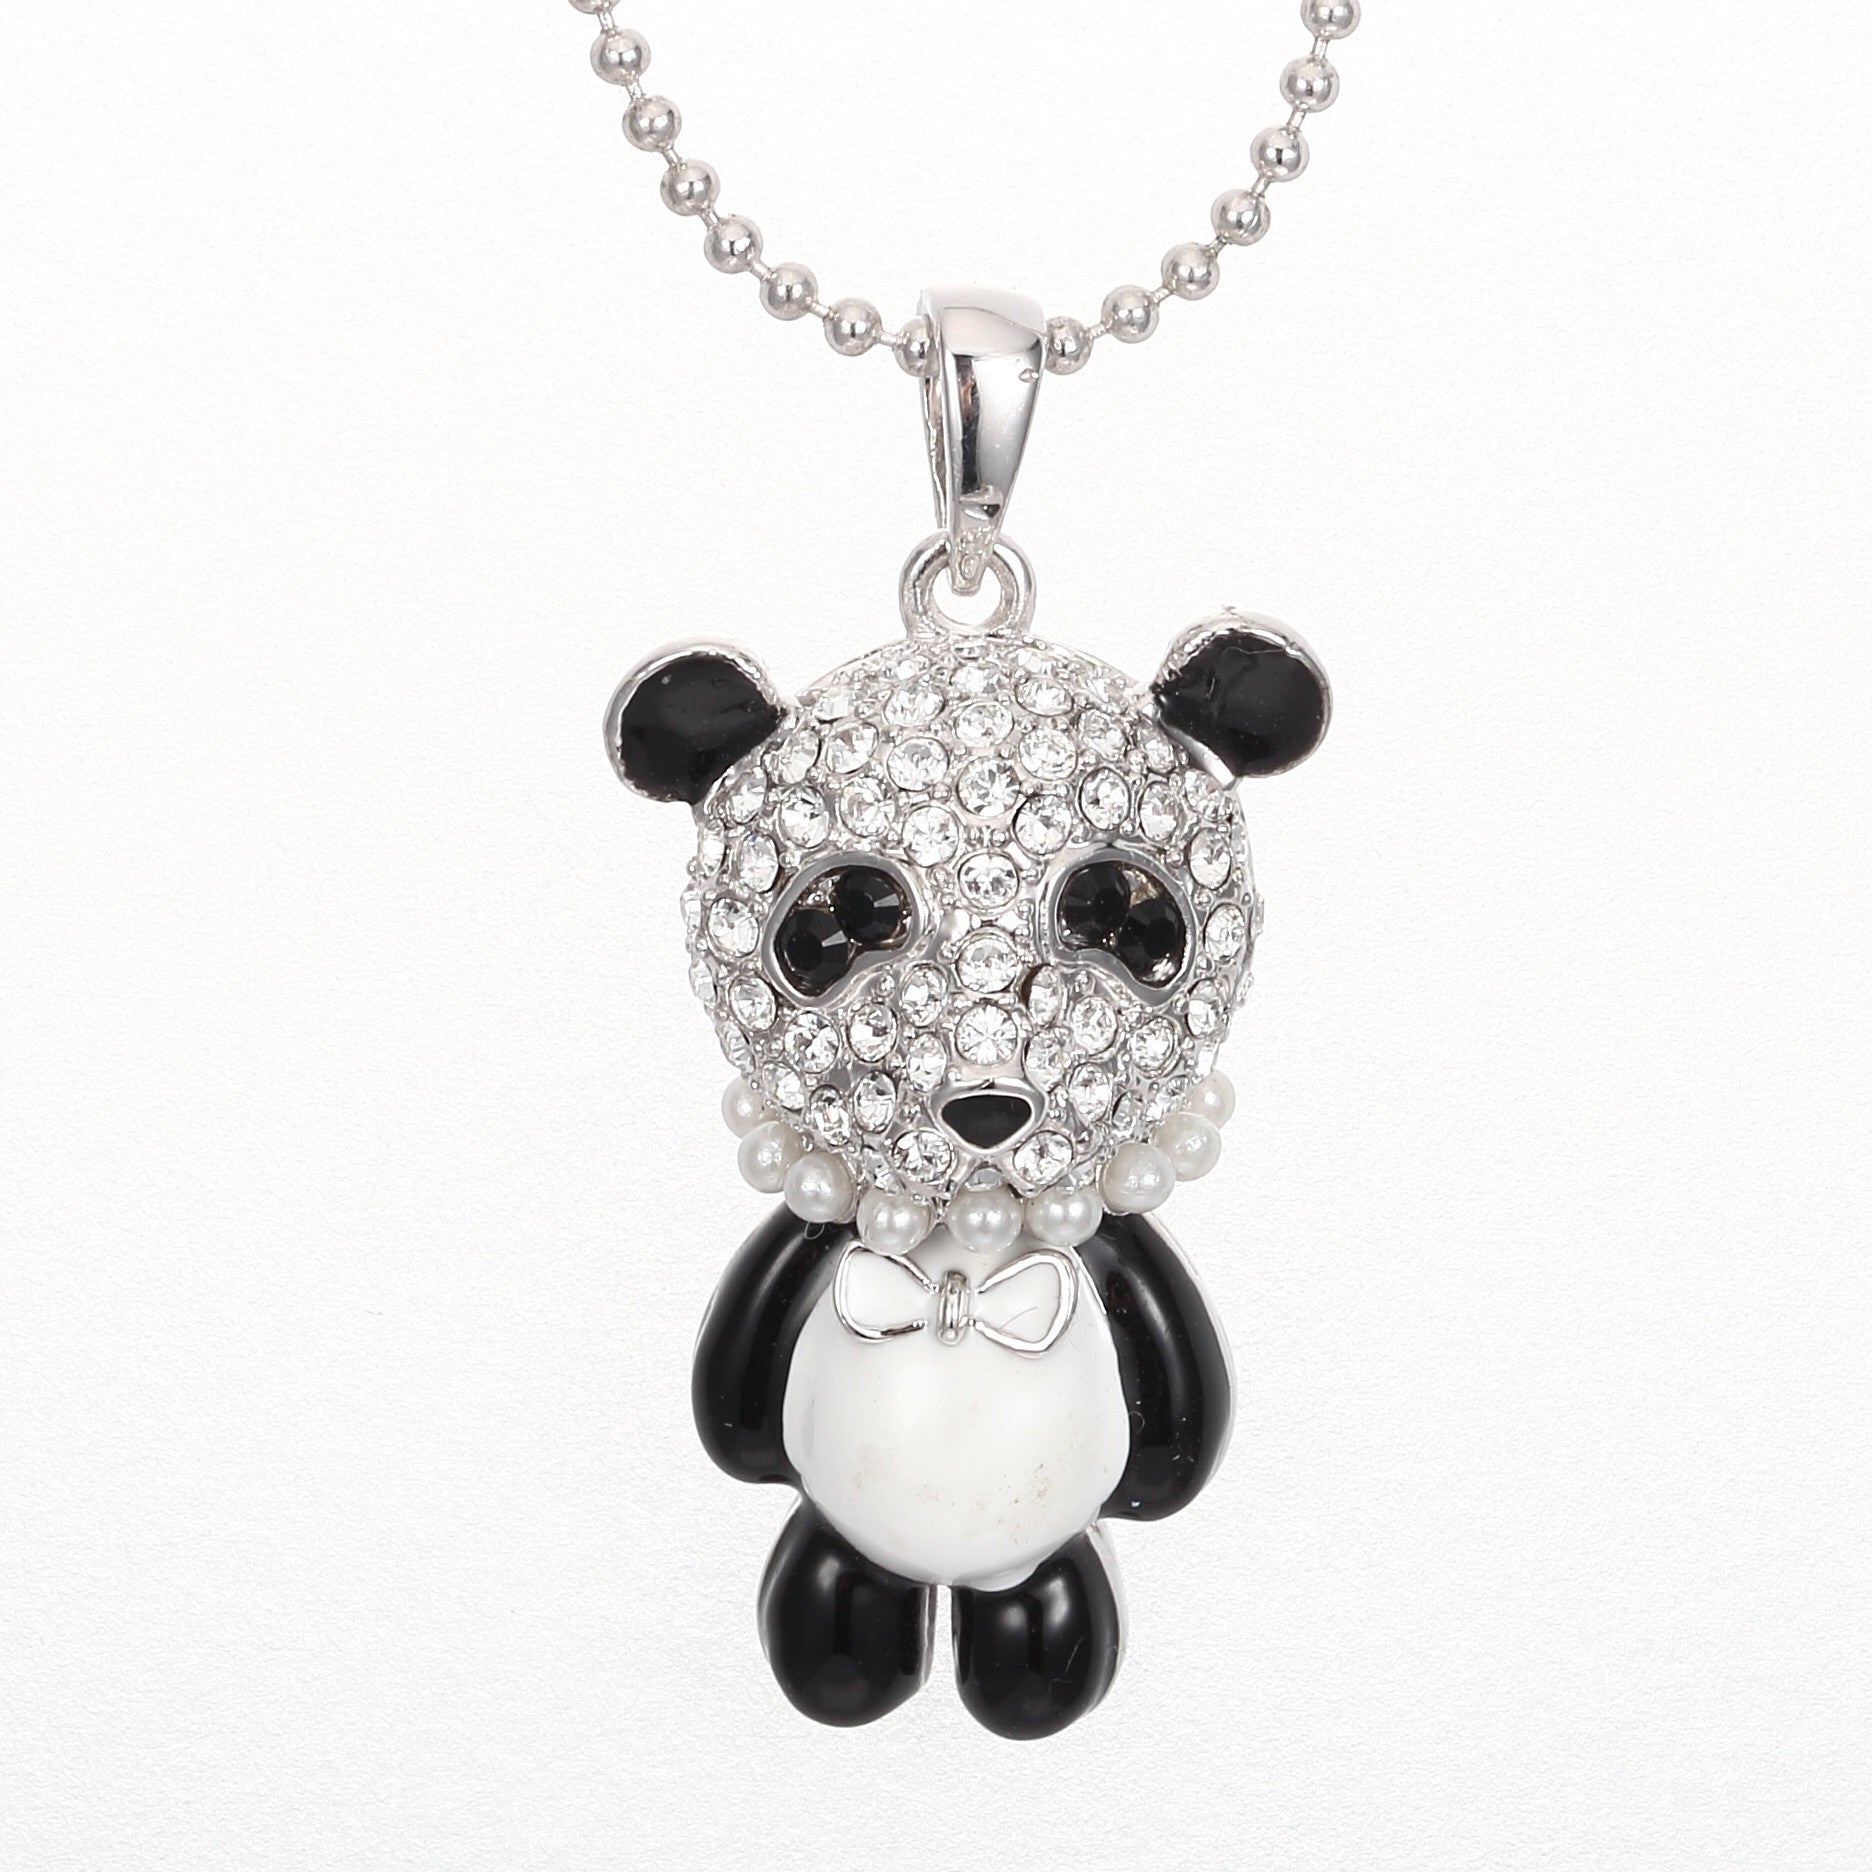 The cute little black and white panda necklace - CDE Jewelry Egypt